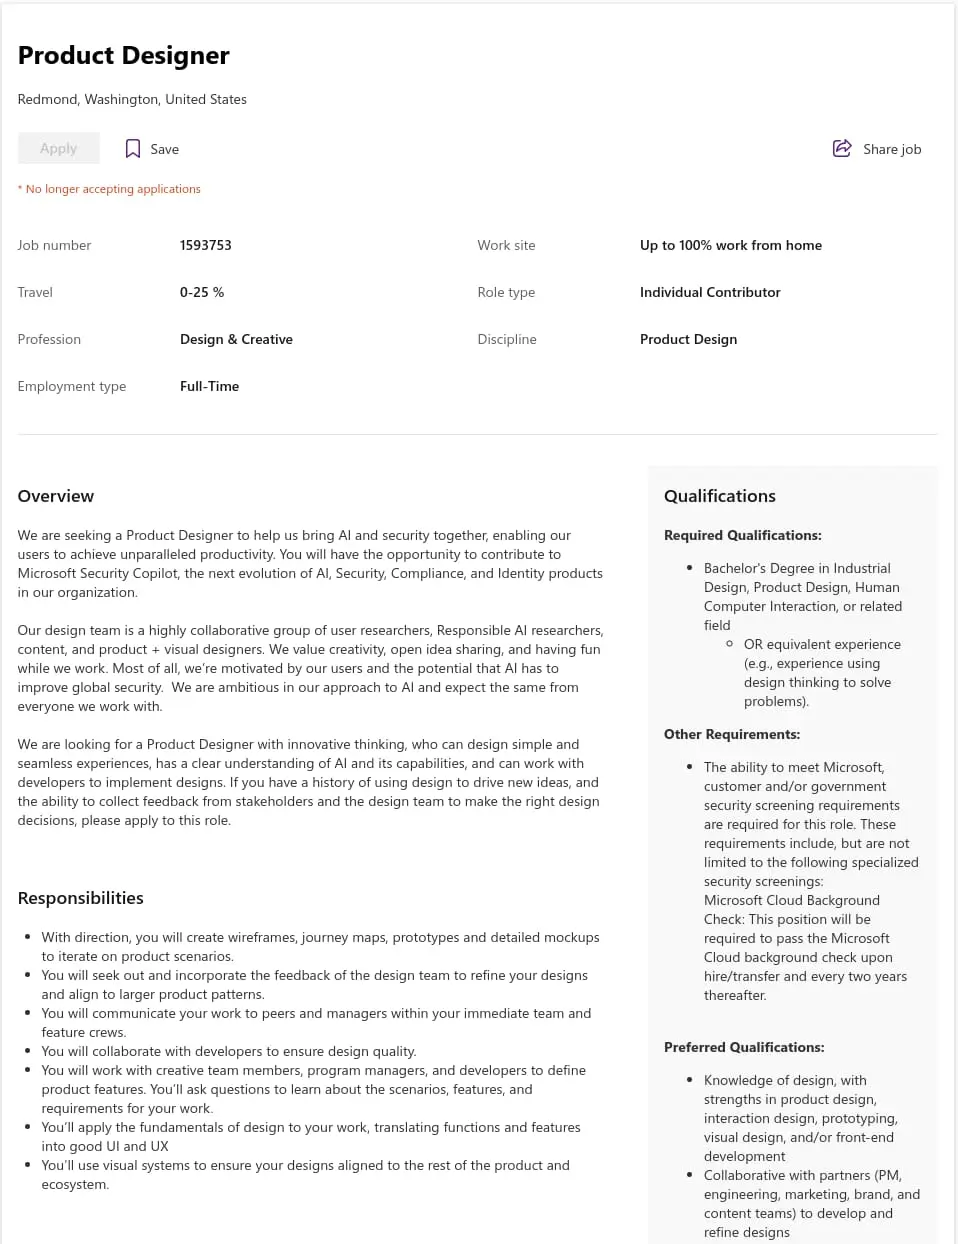 a job ad for a product designer career path